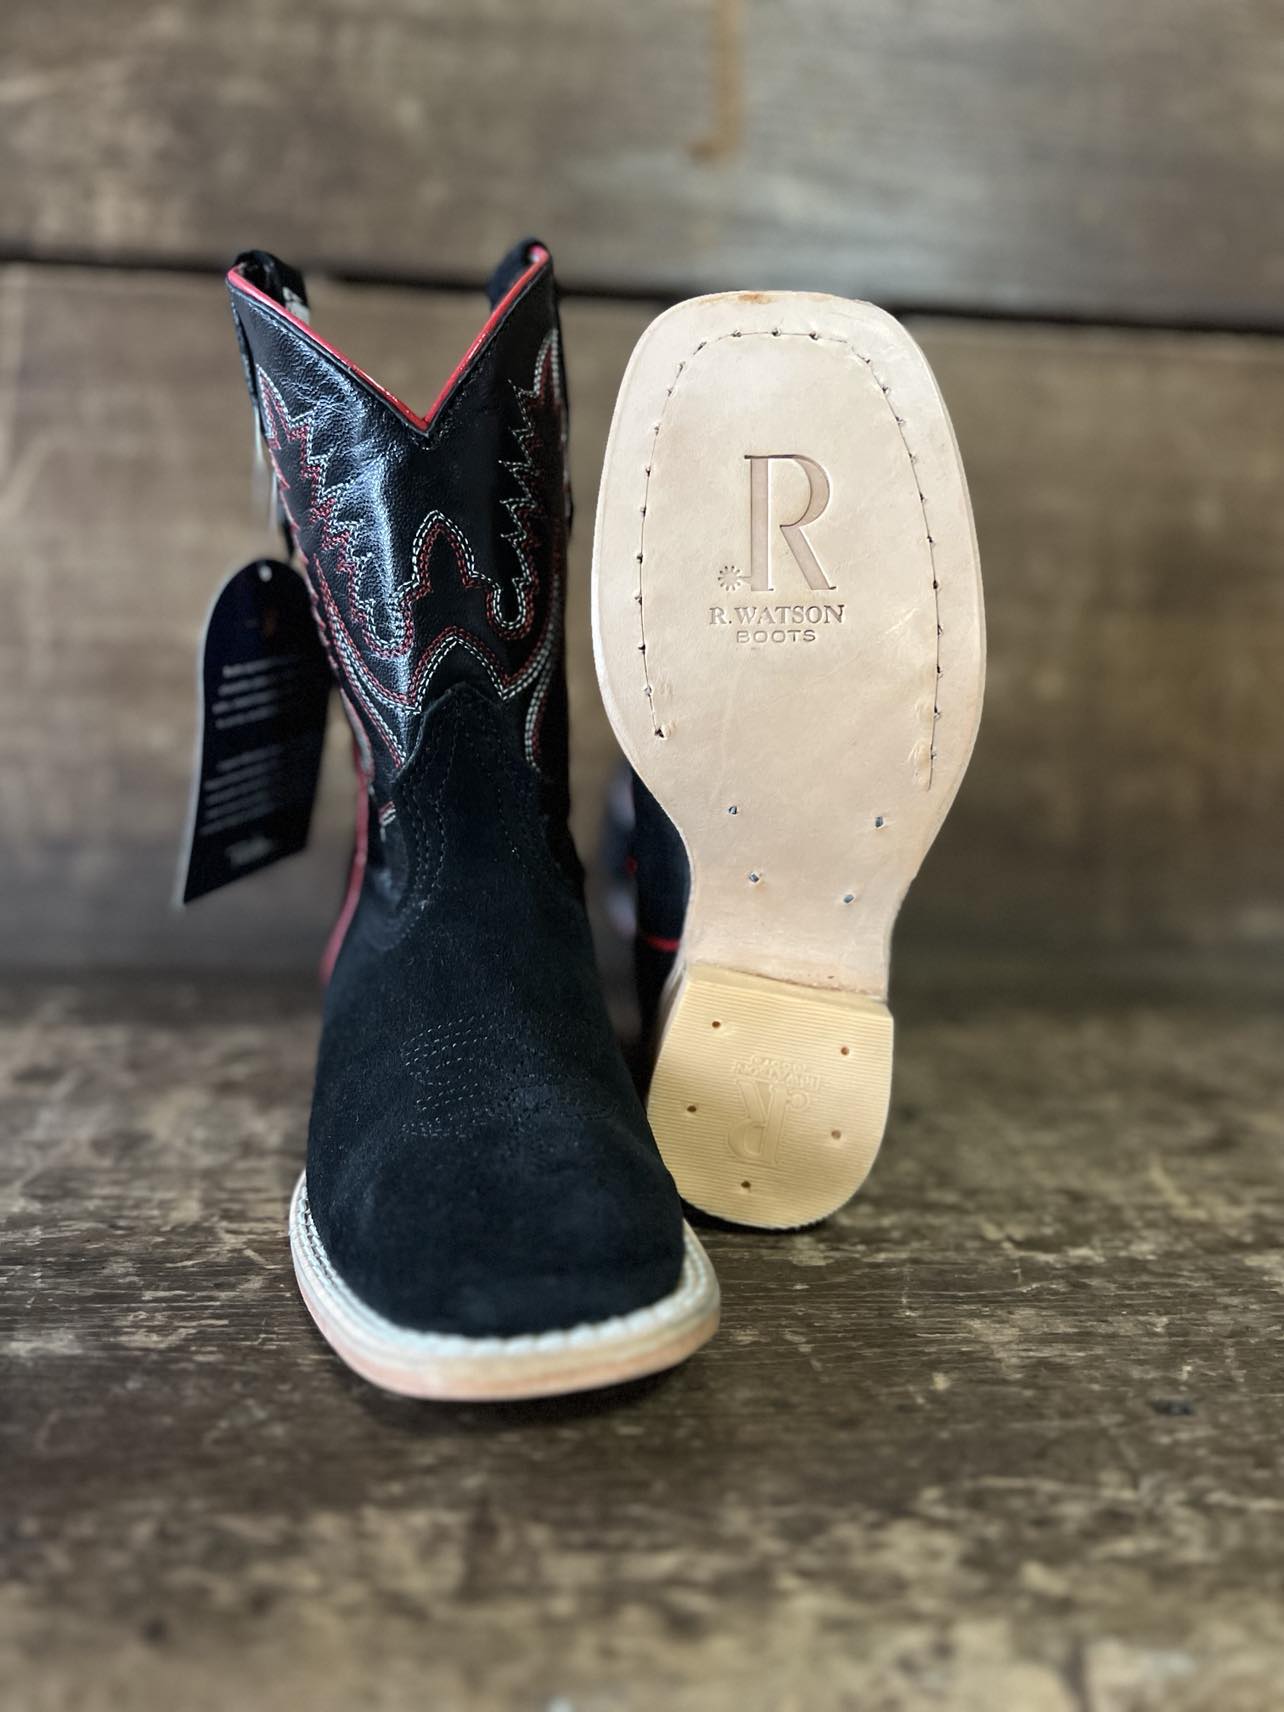 R Watson Kids Black Rough Out/ Black Cowhide-Kids Boots-R. Watson-Lucky J Boots & More, Women's, Men's, & Kids Western Store Located in Carthage, MO